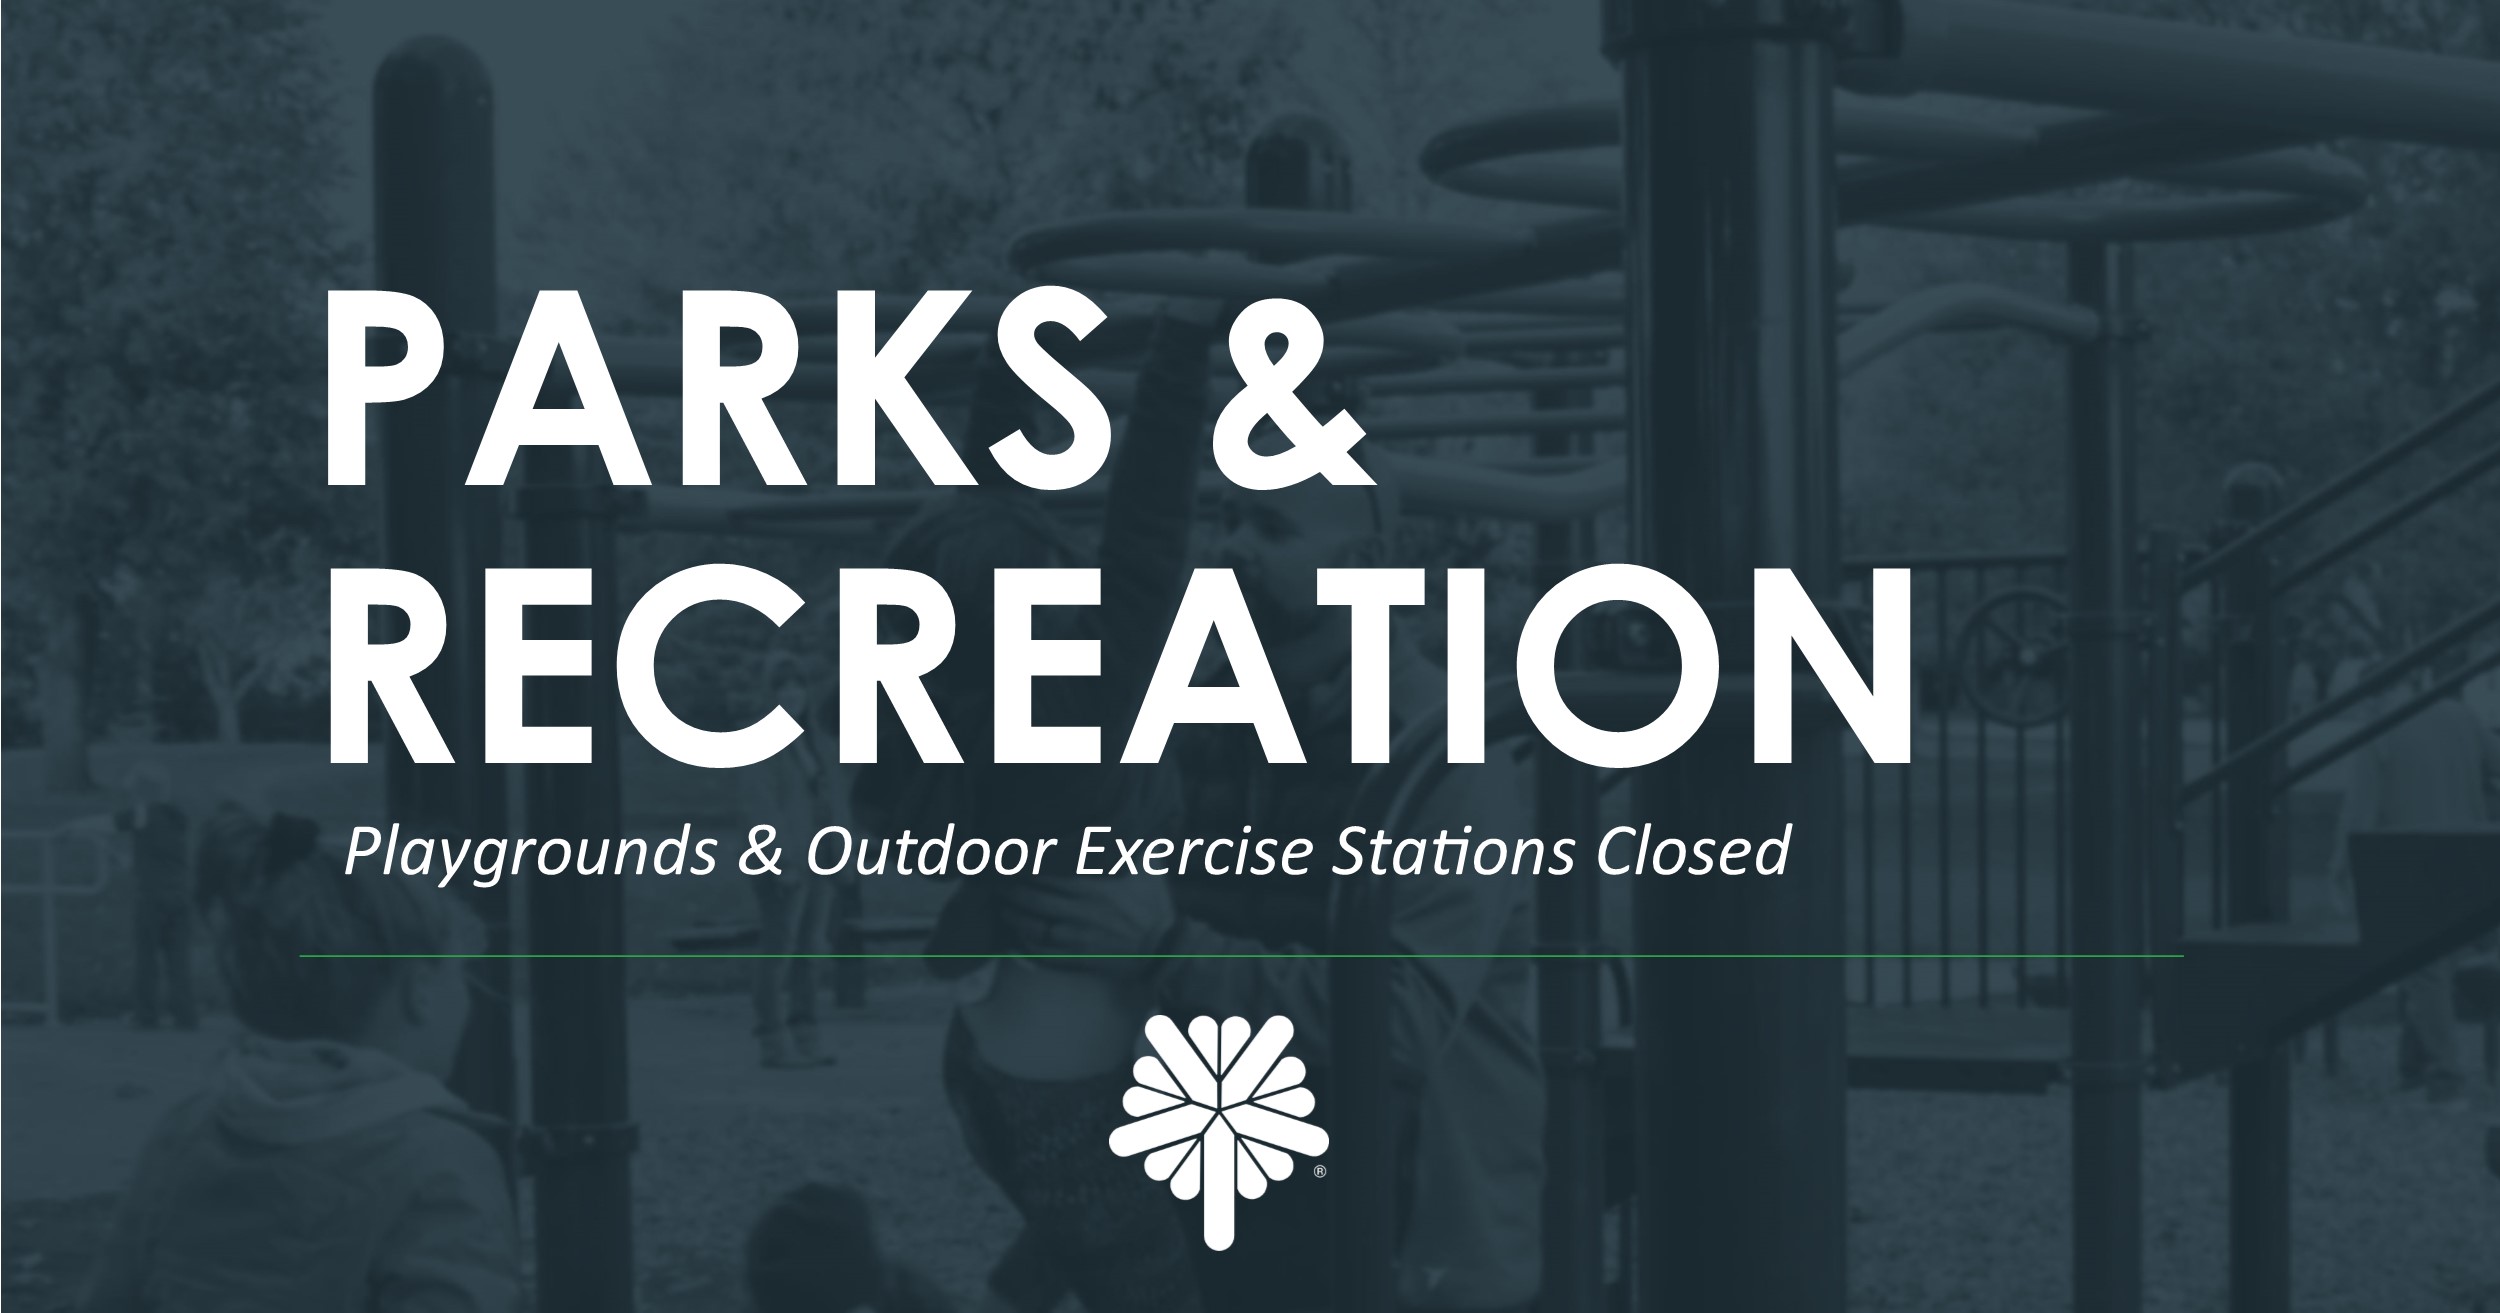 Parks & Recreation - Playgrounds and outdoor exercise stations closed